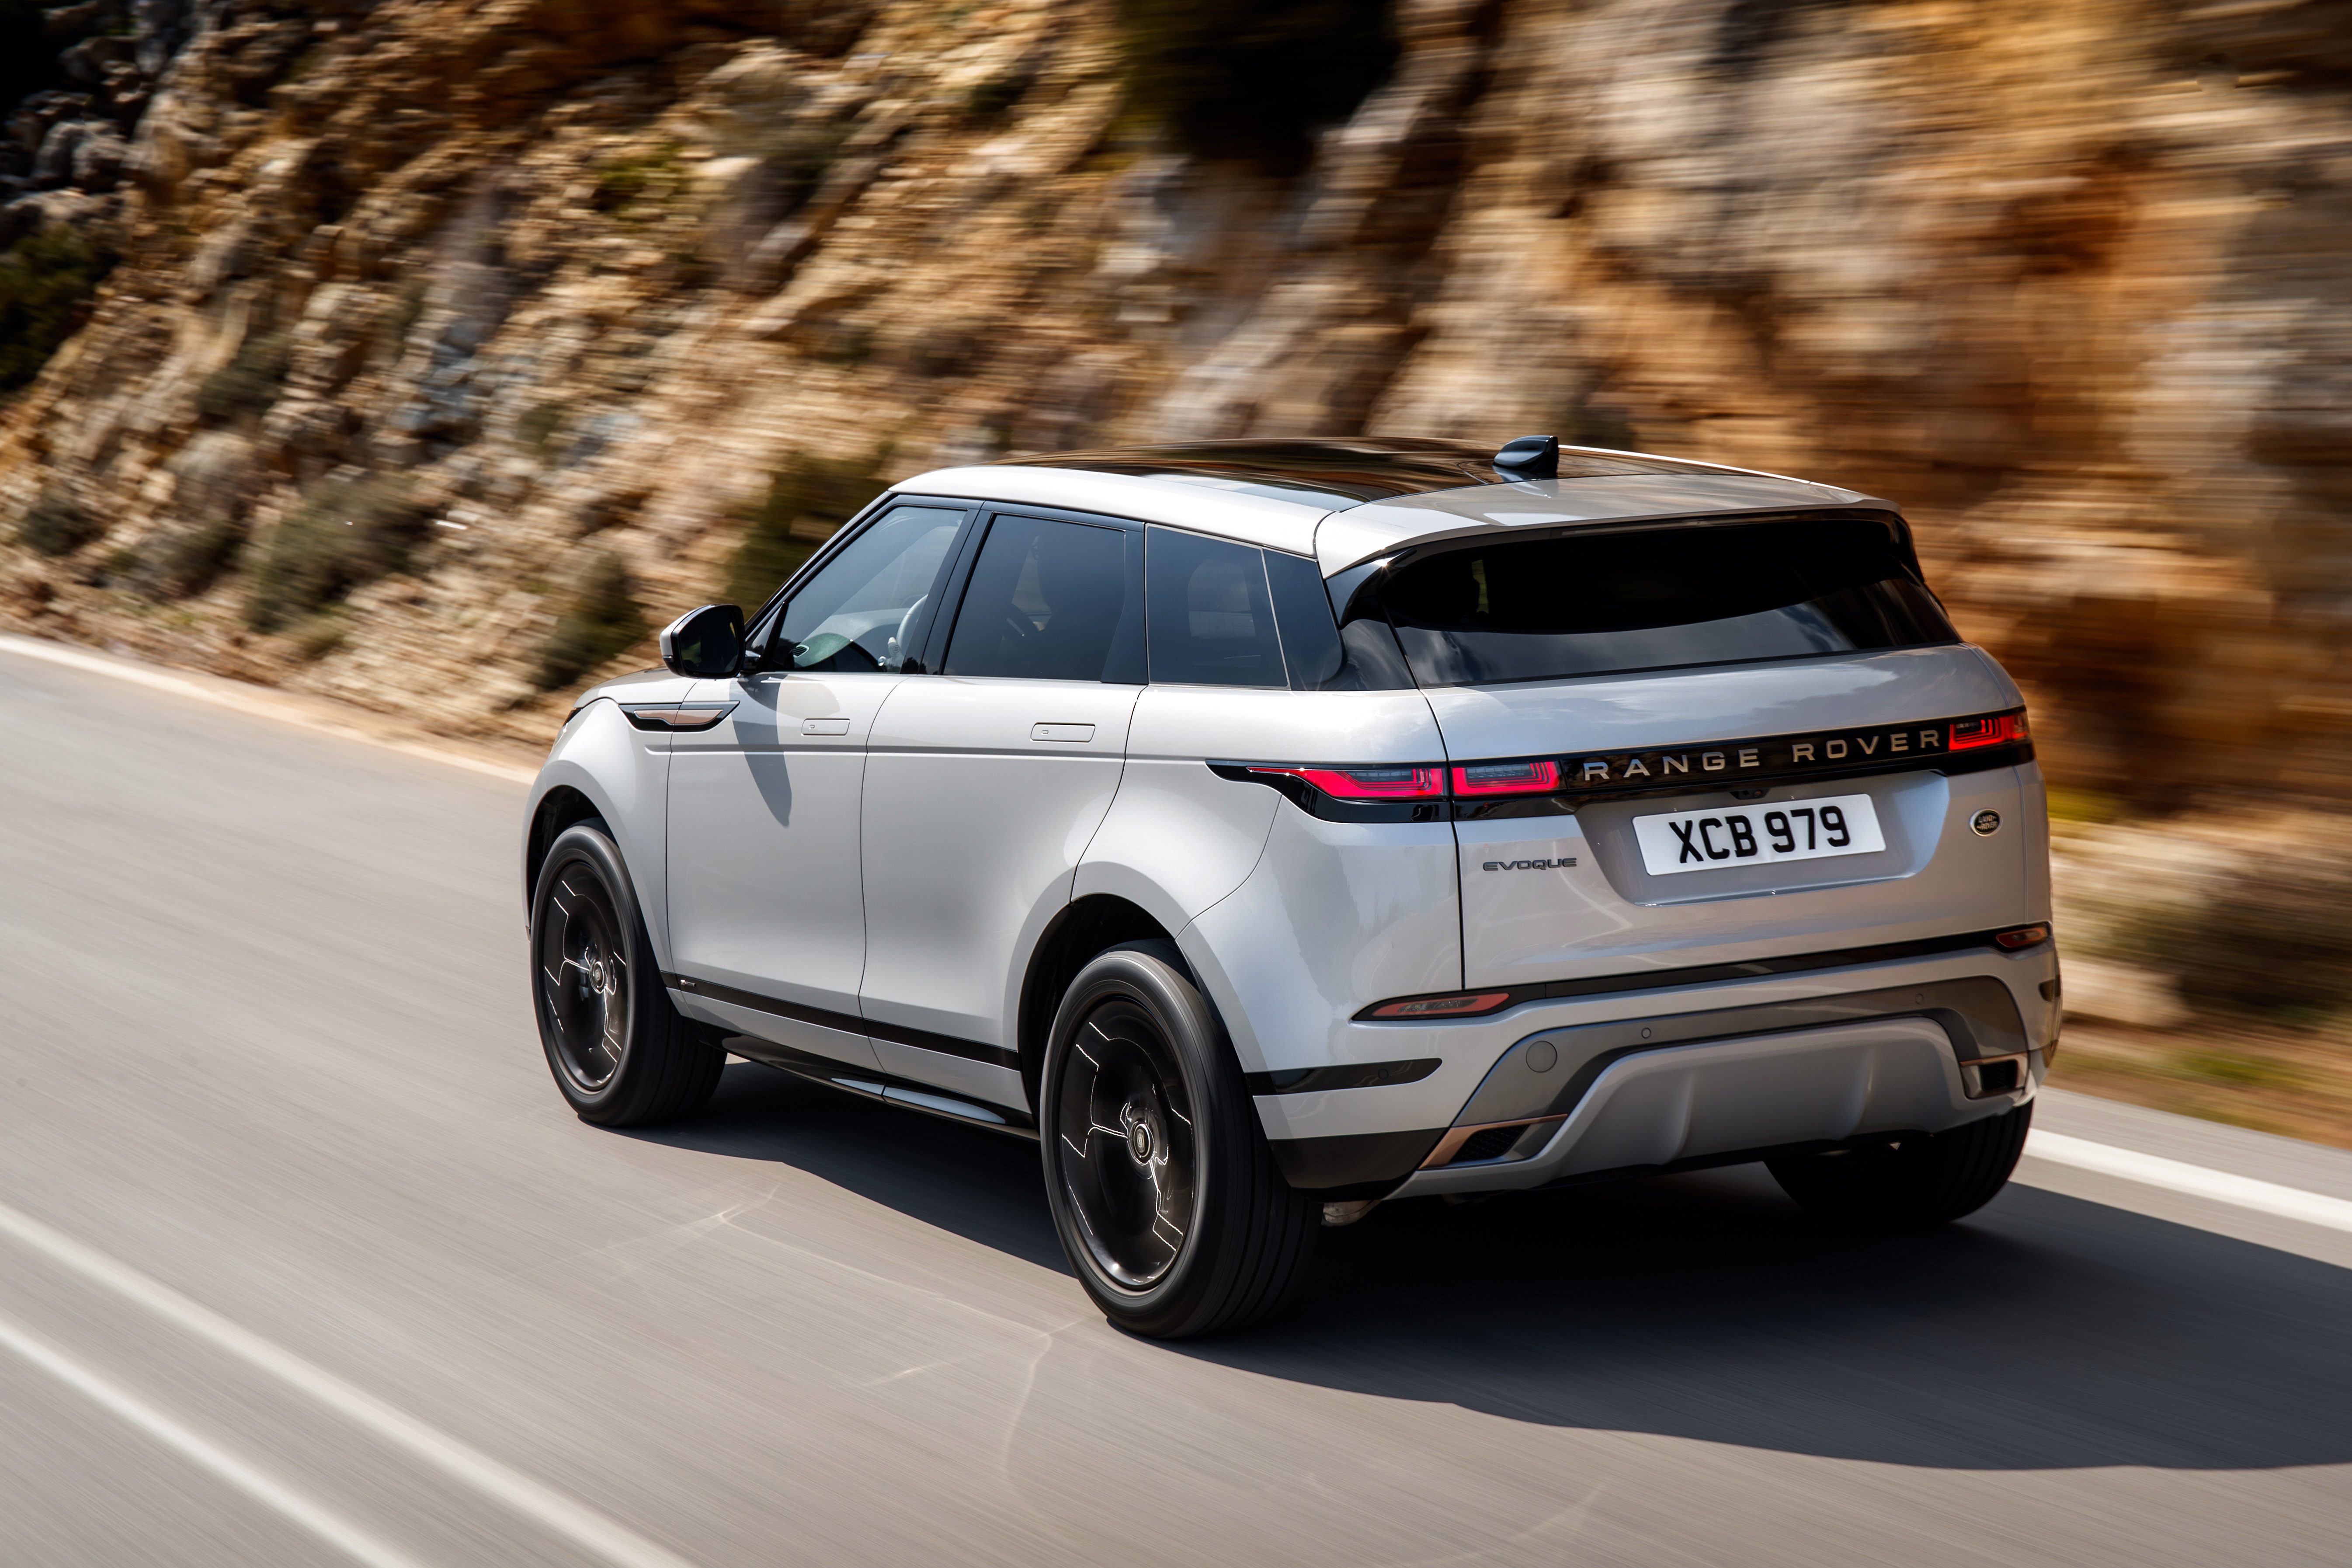 Land Rover Range Rover Evoque accessories specifications